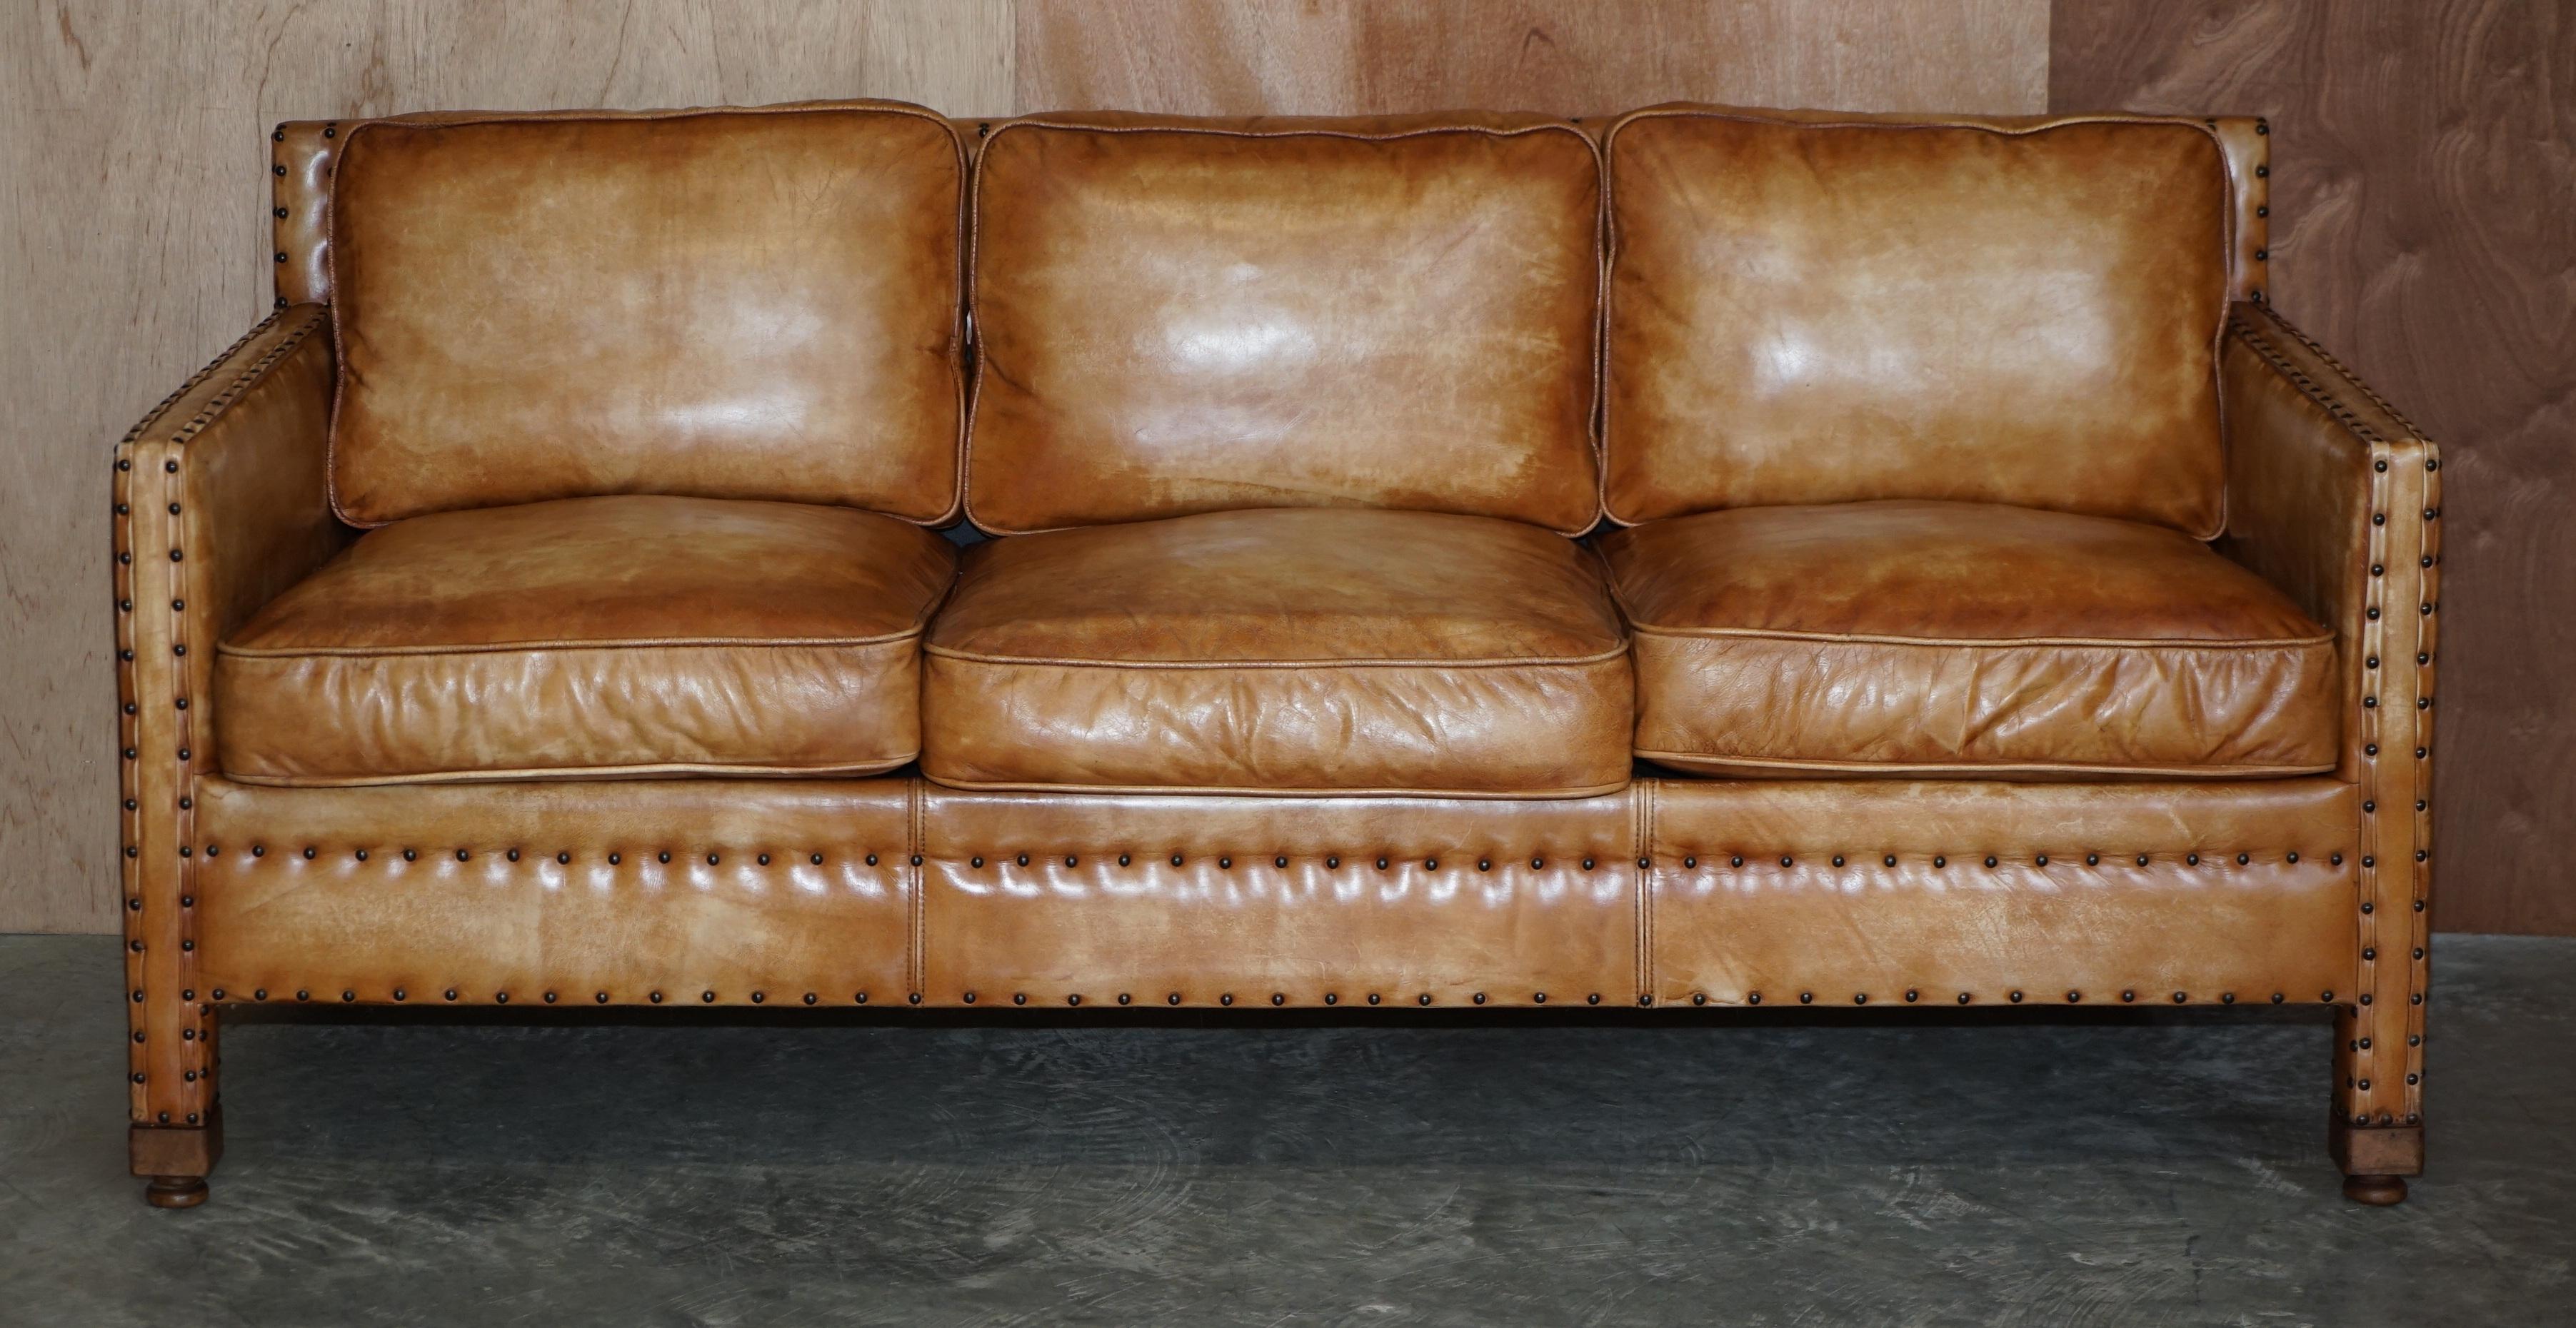 We are delighted to offer for sale this lovely hand dyed tan brown leather three seat sofa with ornate stud work all over

The sofa is well made and stylish, the leather is fully aniline cattle hide so it has a thick natural look, its then hand